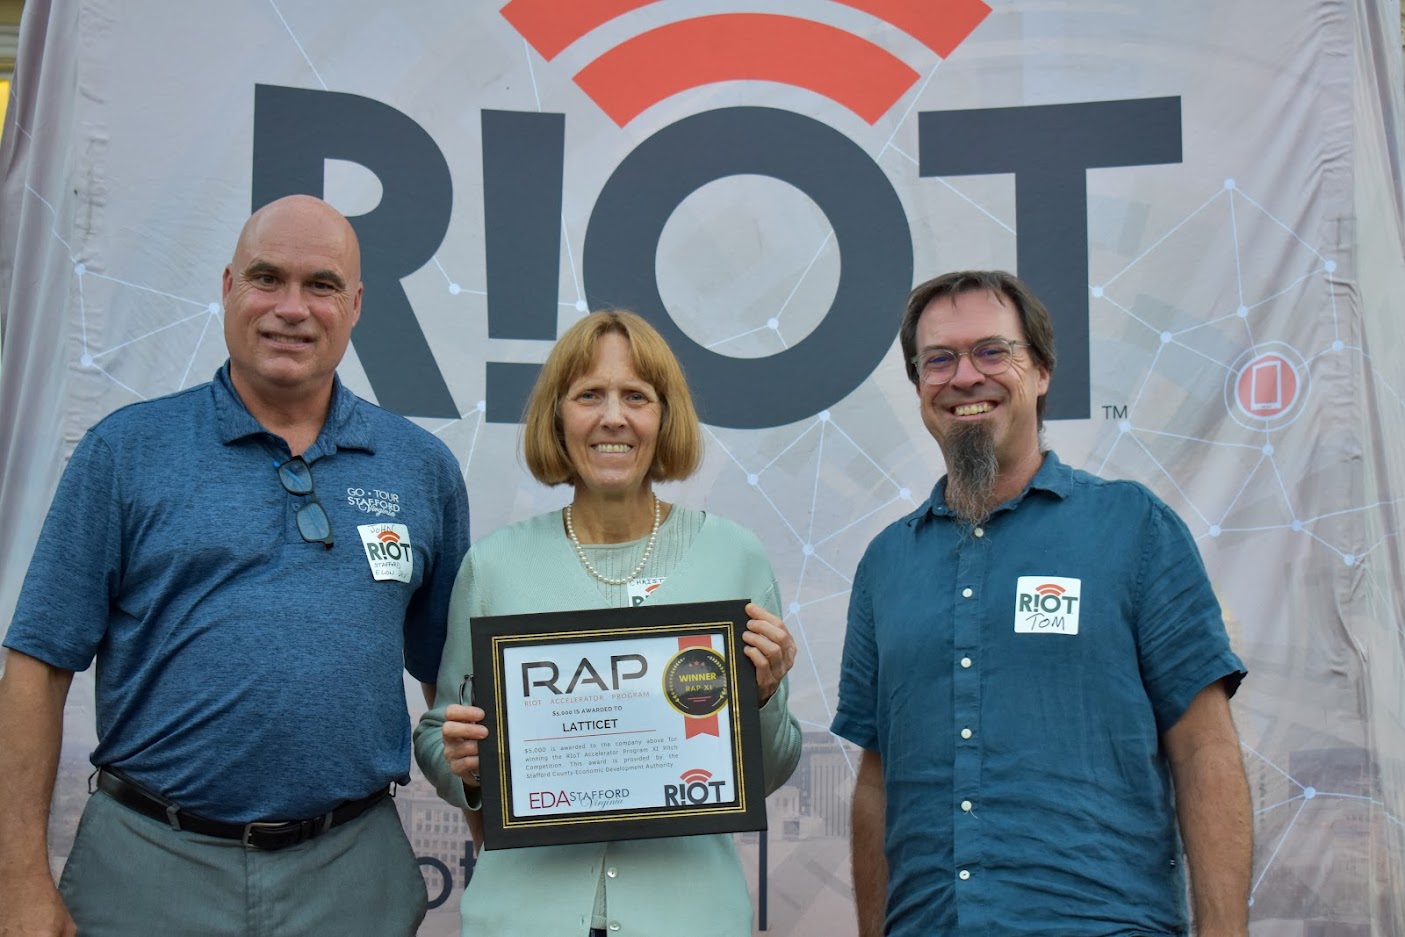 RIoT Accelerator Program Awards $5000 to Start-up Business at the VA Inaugural Pitch Night